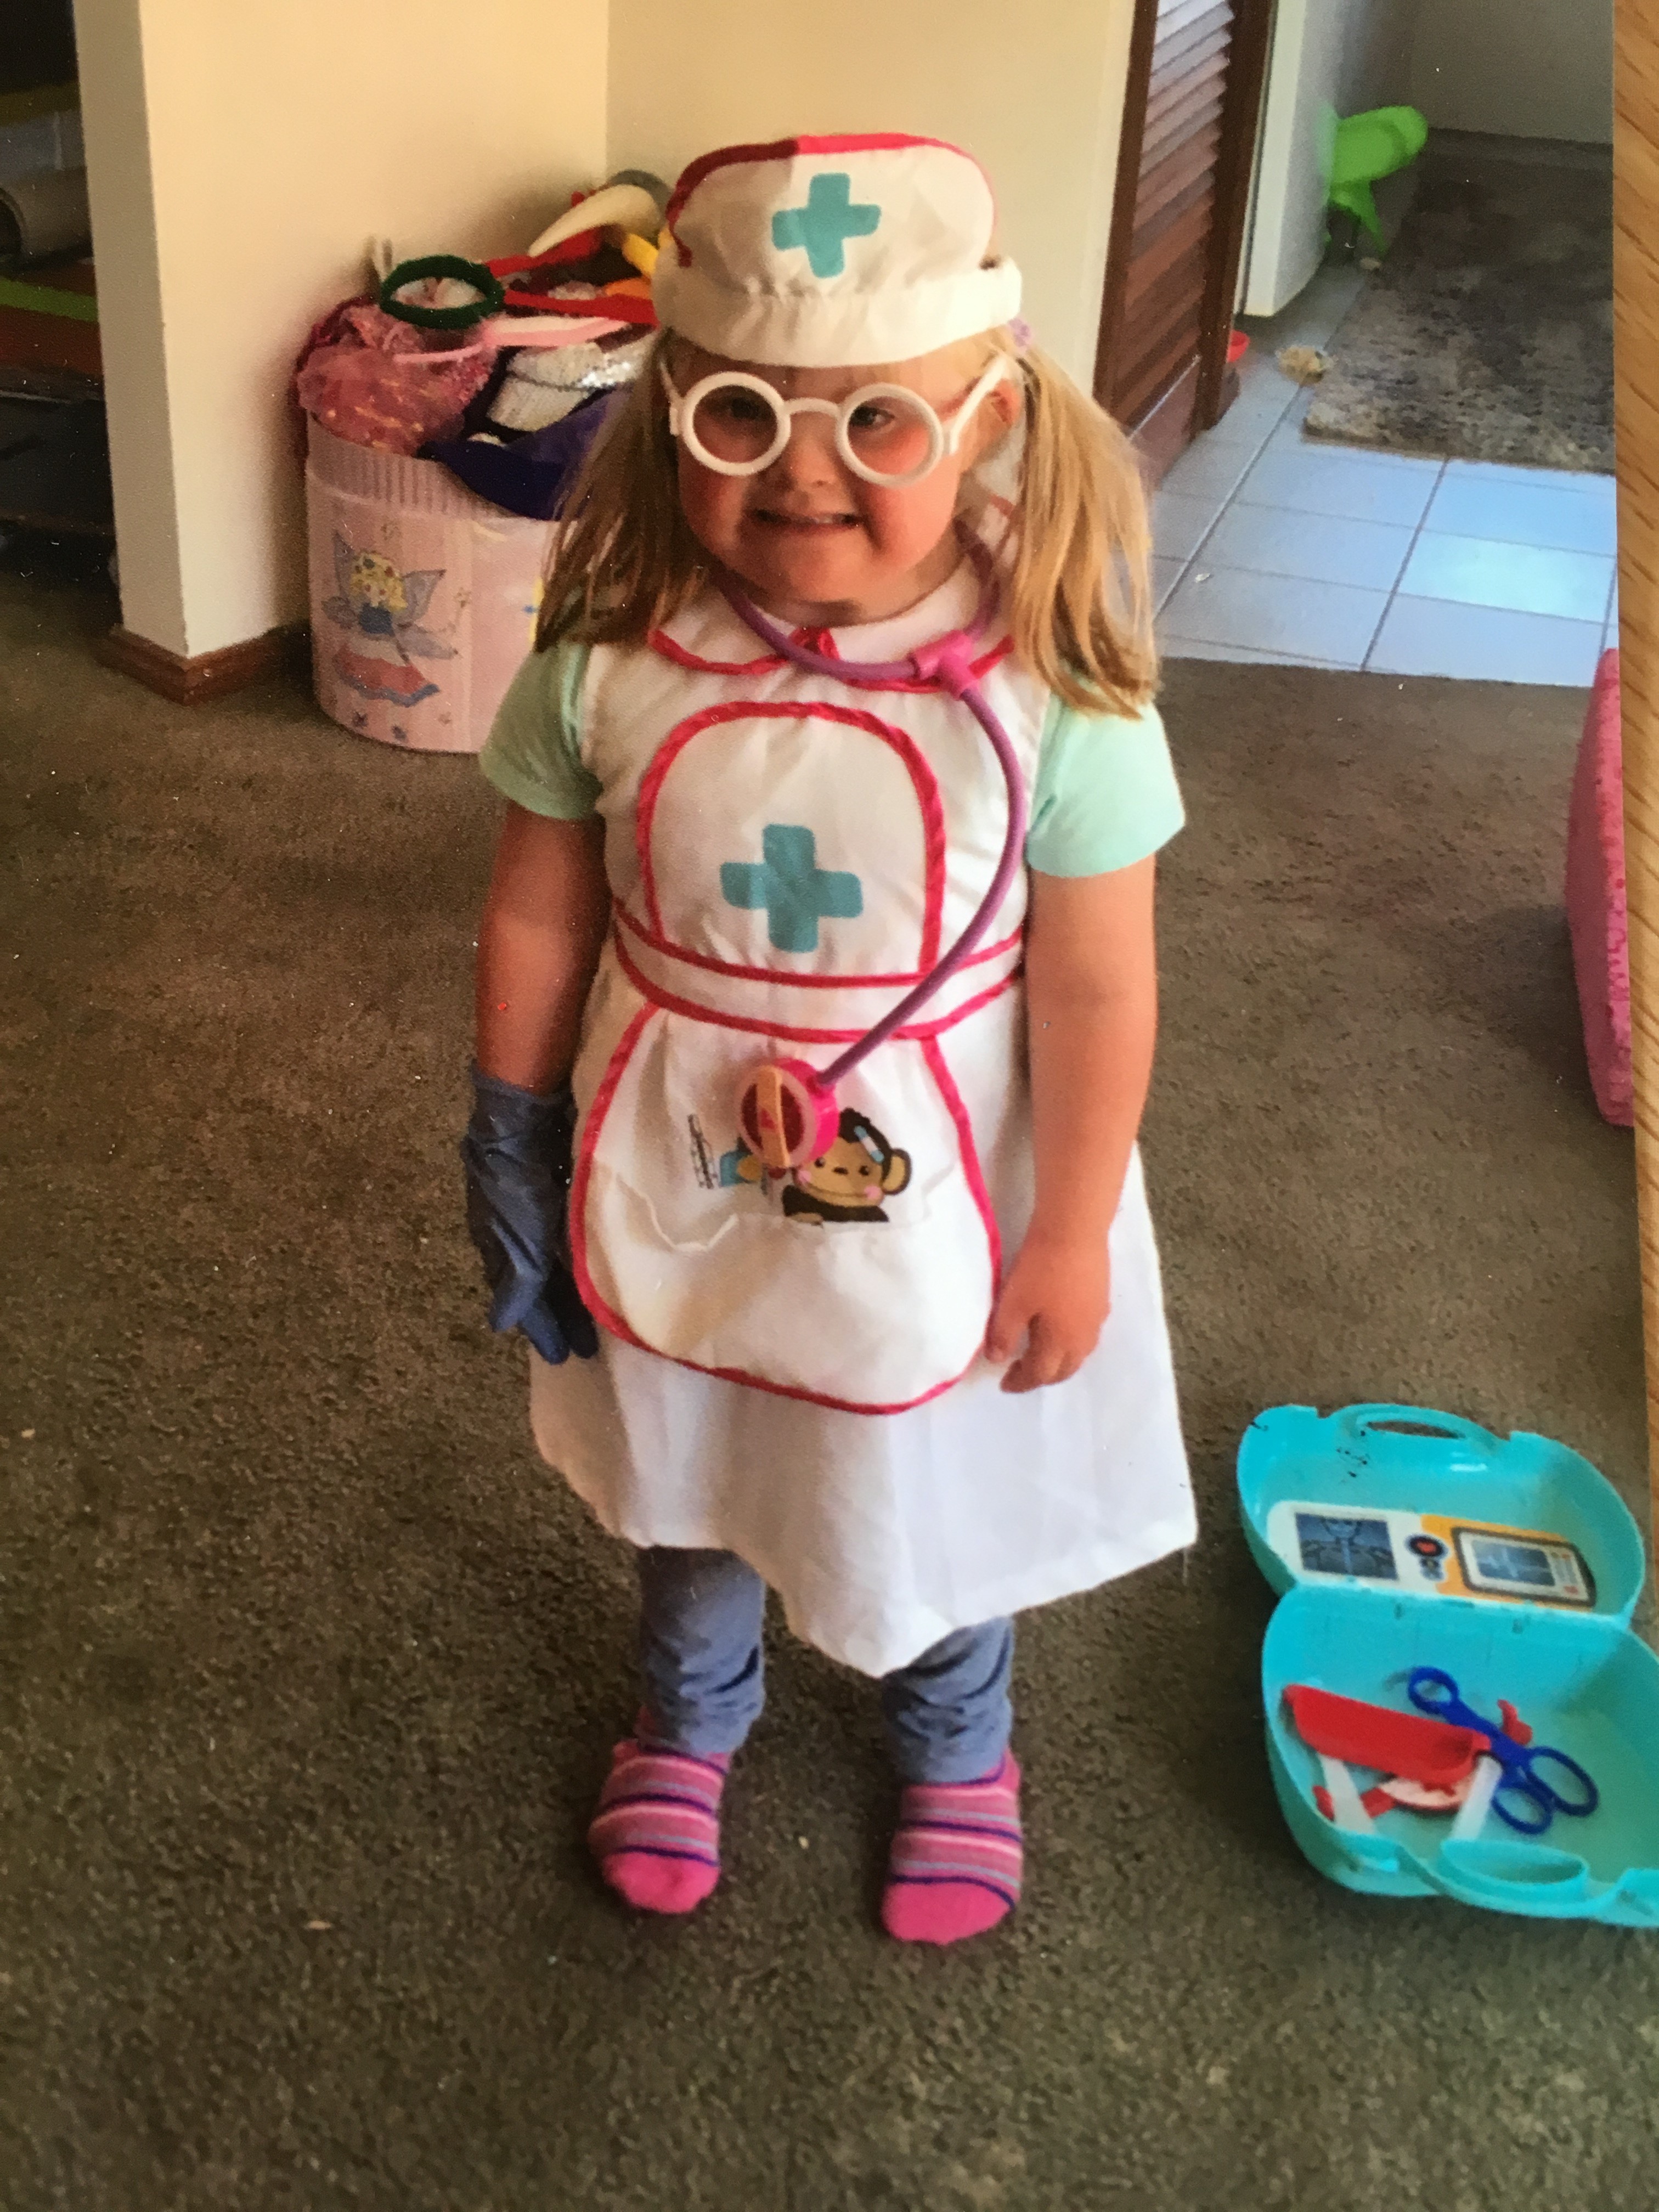 A small child is dressed as a nurse in a uniform with brightly coloured accessories